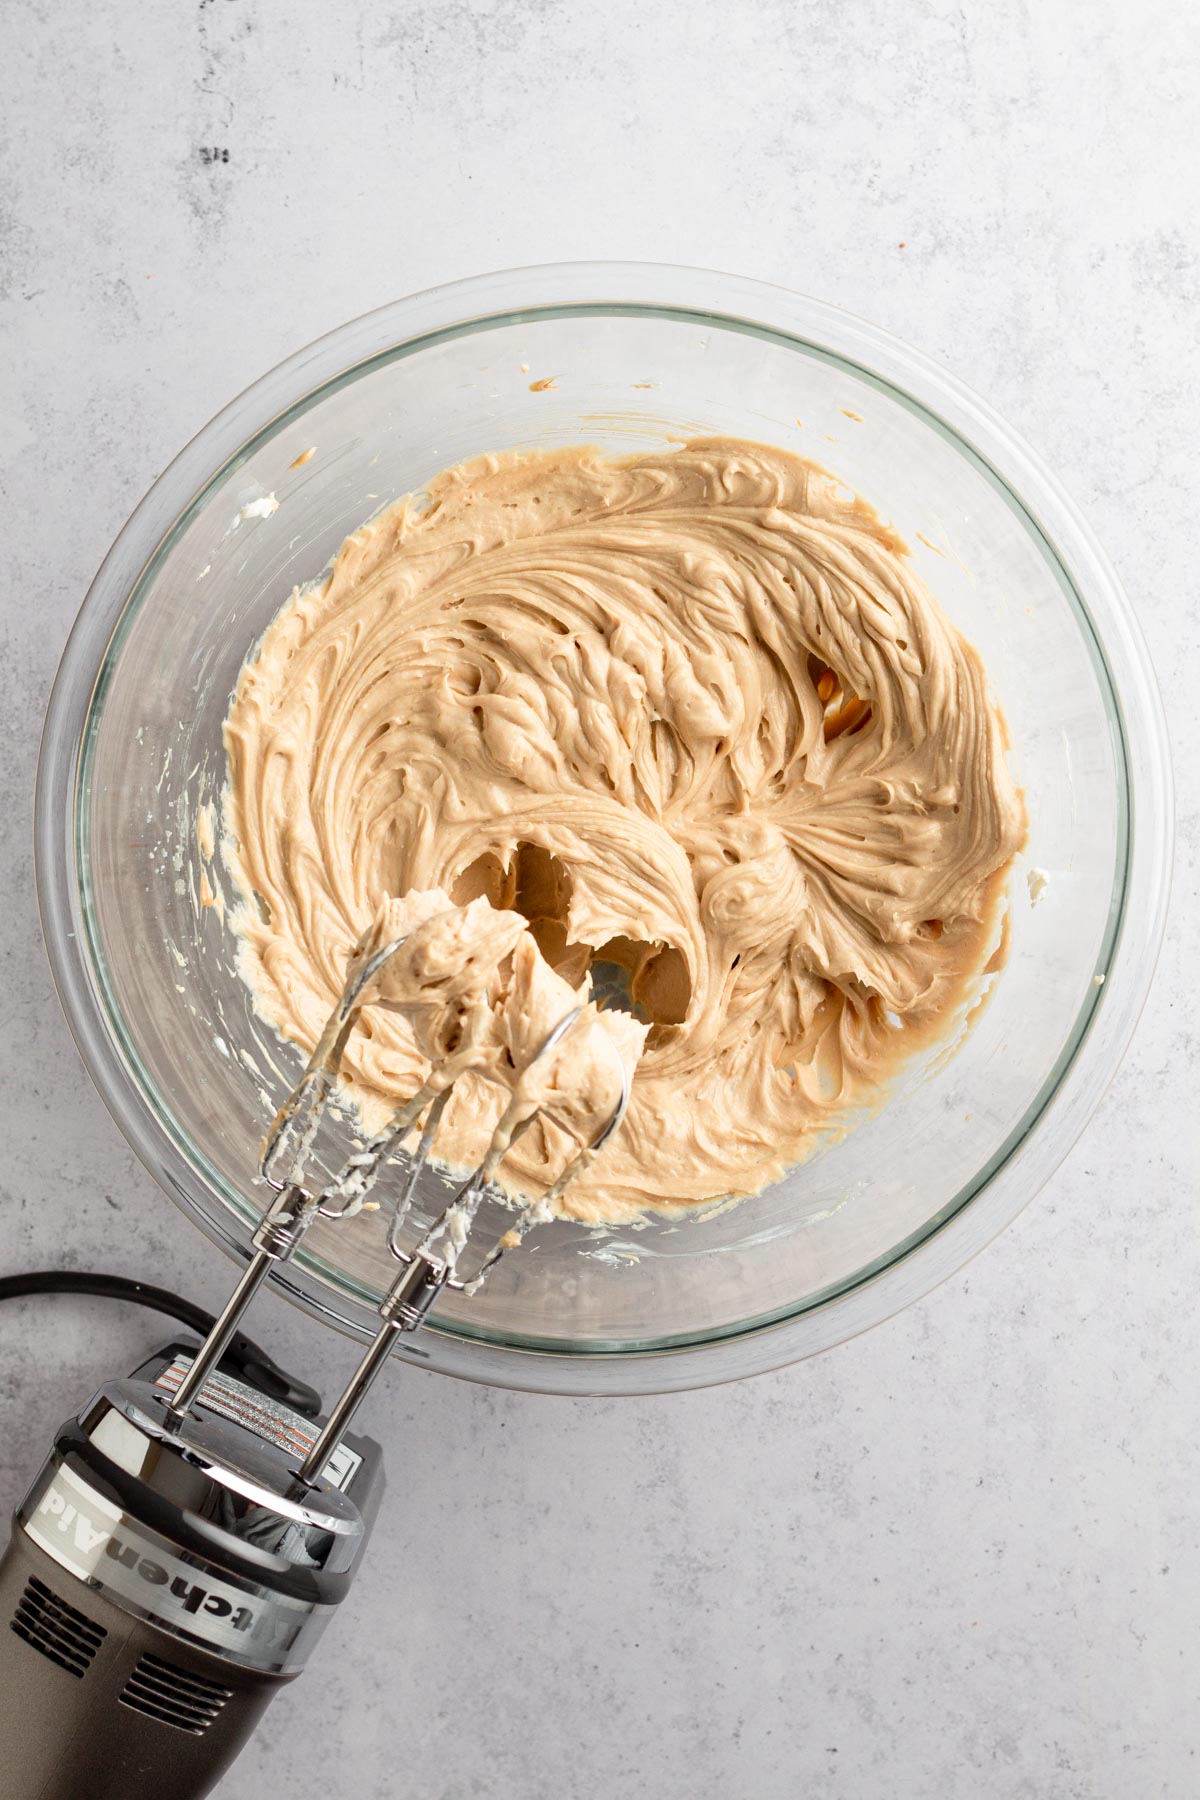 Cream cheese mixture in a glass bowl with hand mixer.